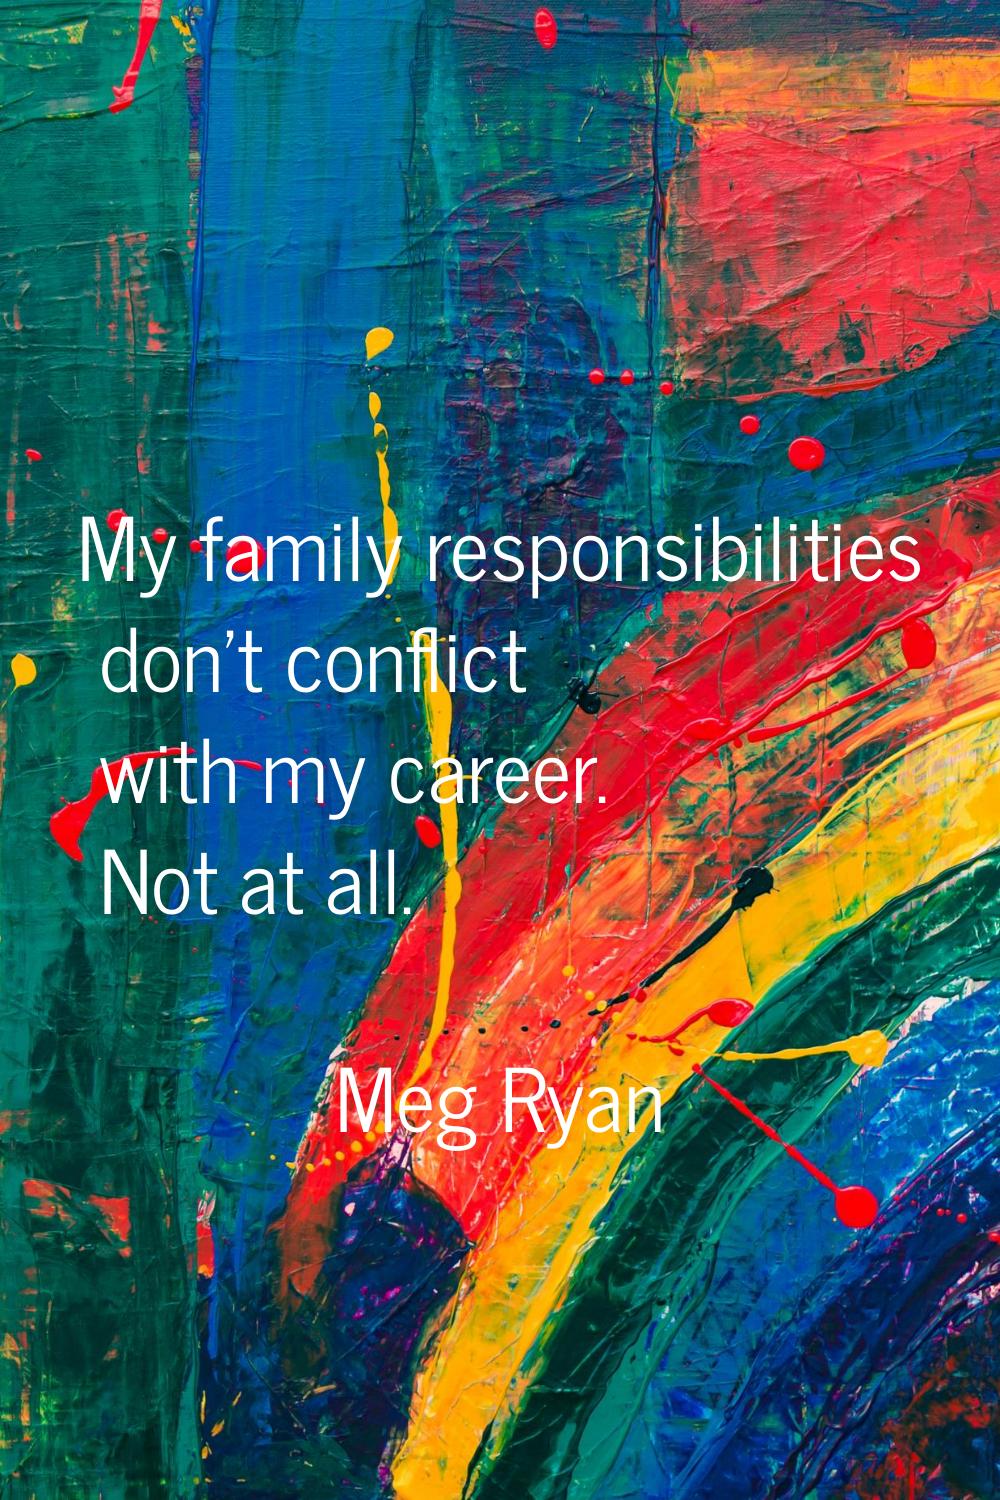 My family responsibilities don't conflict with my career. Not at all.